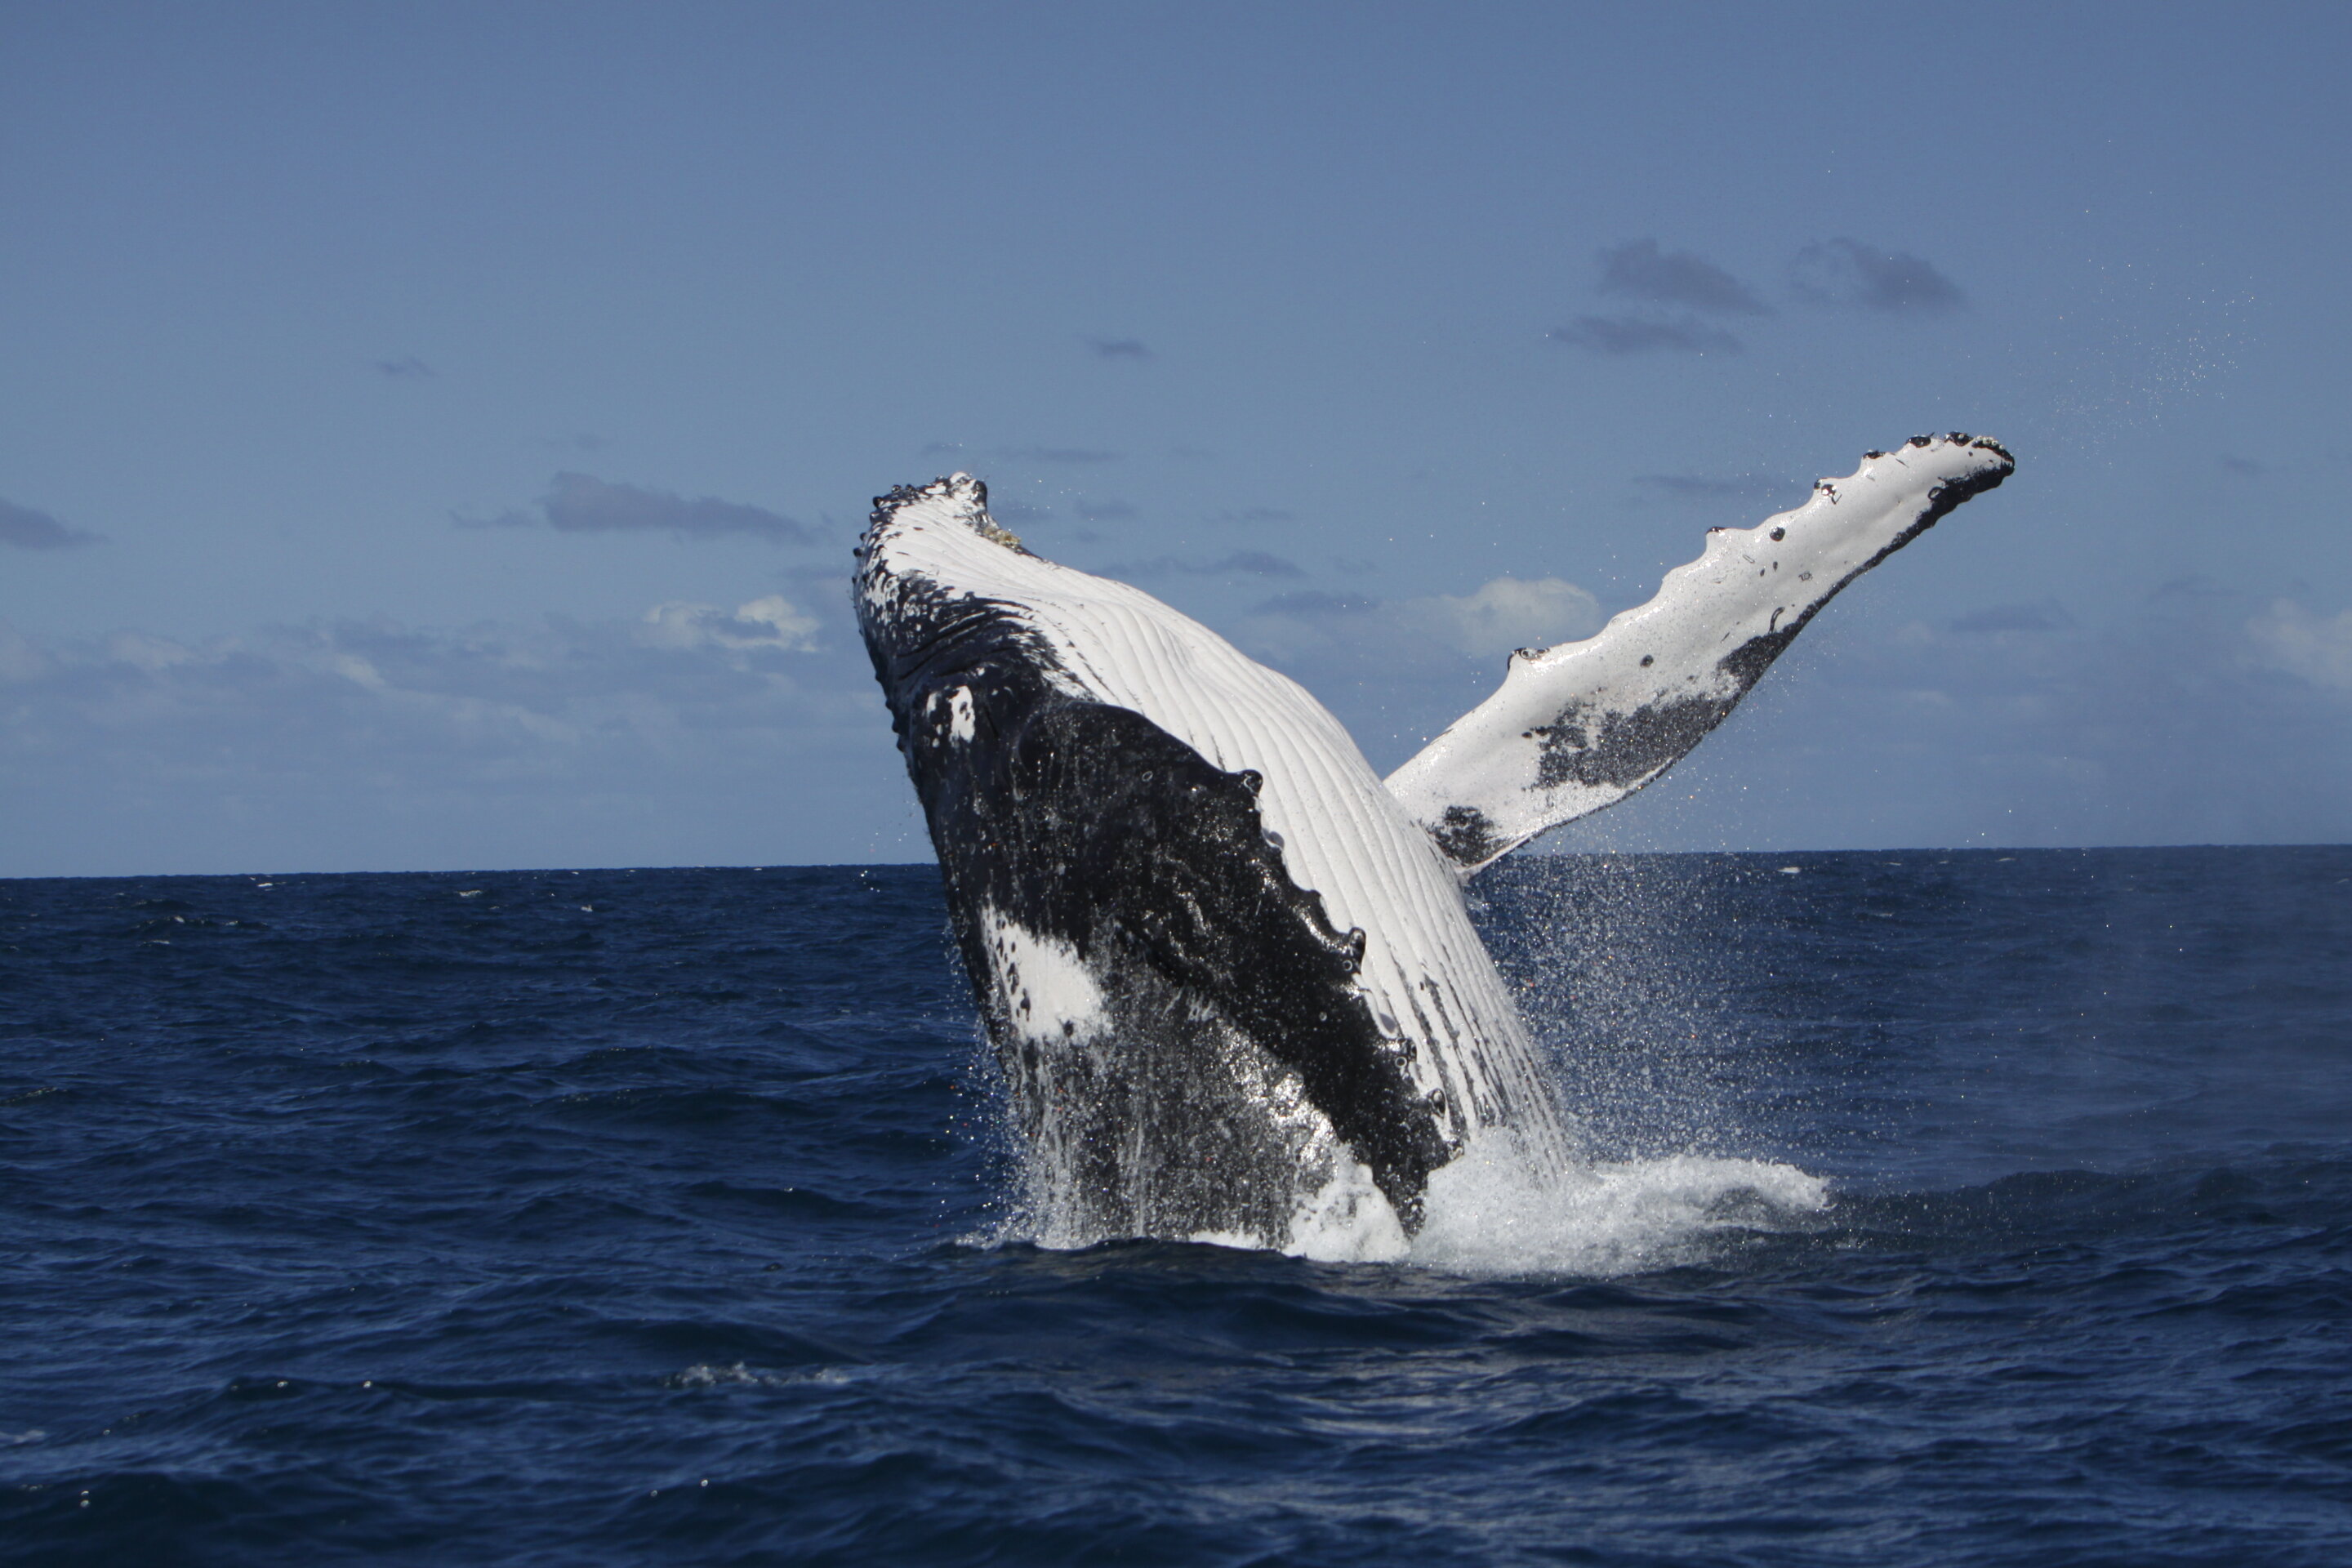 Whales learn songs from each other in a cultural 'deep dive'